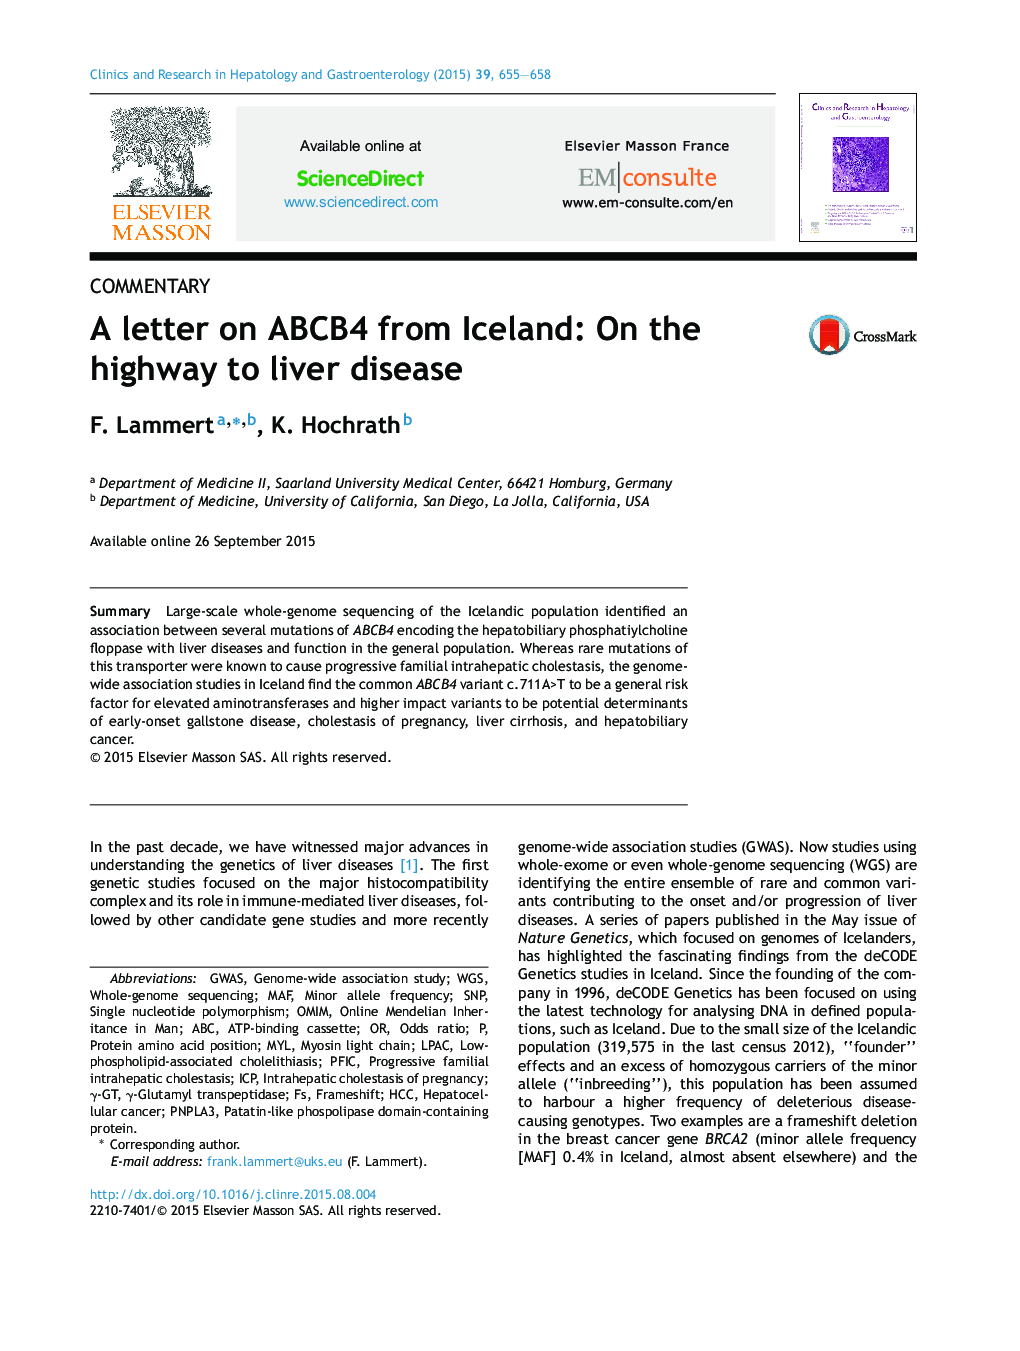 A letter on ABCB4 from Iceland: On the highway to liver disease